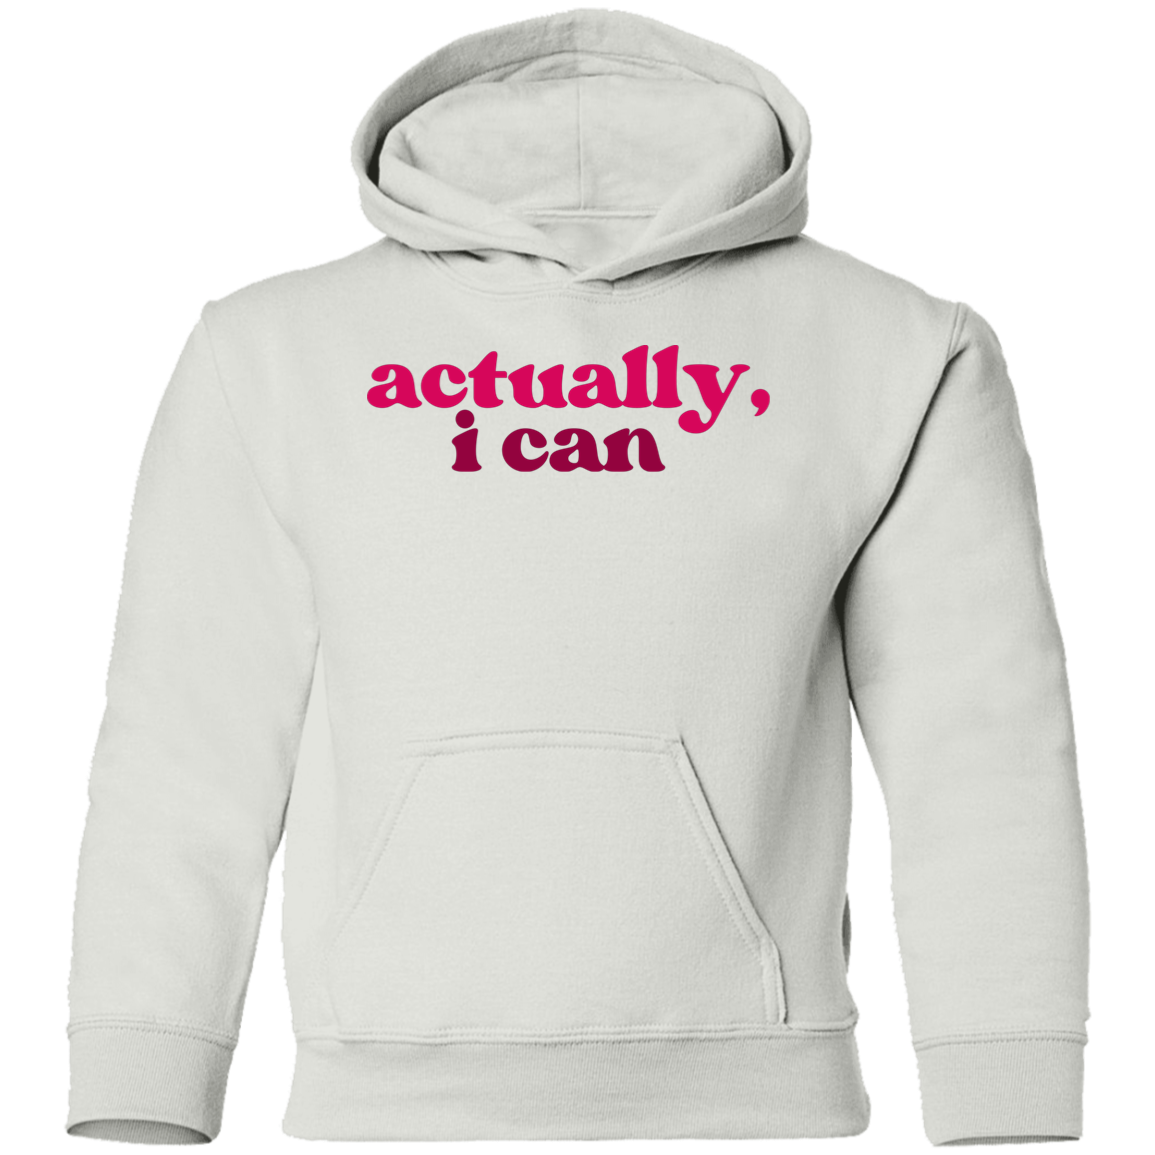 Actually, I Can Hoodie Youth